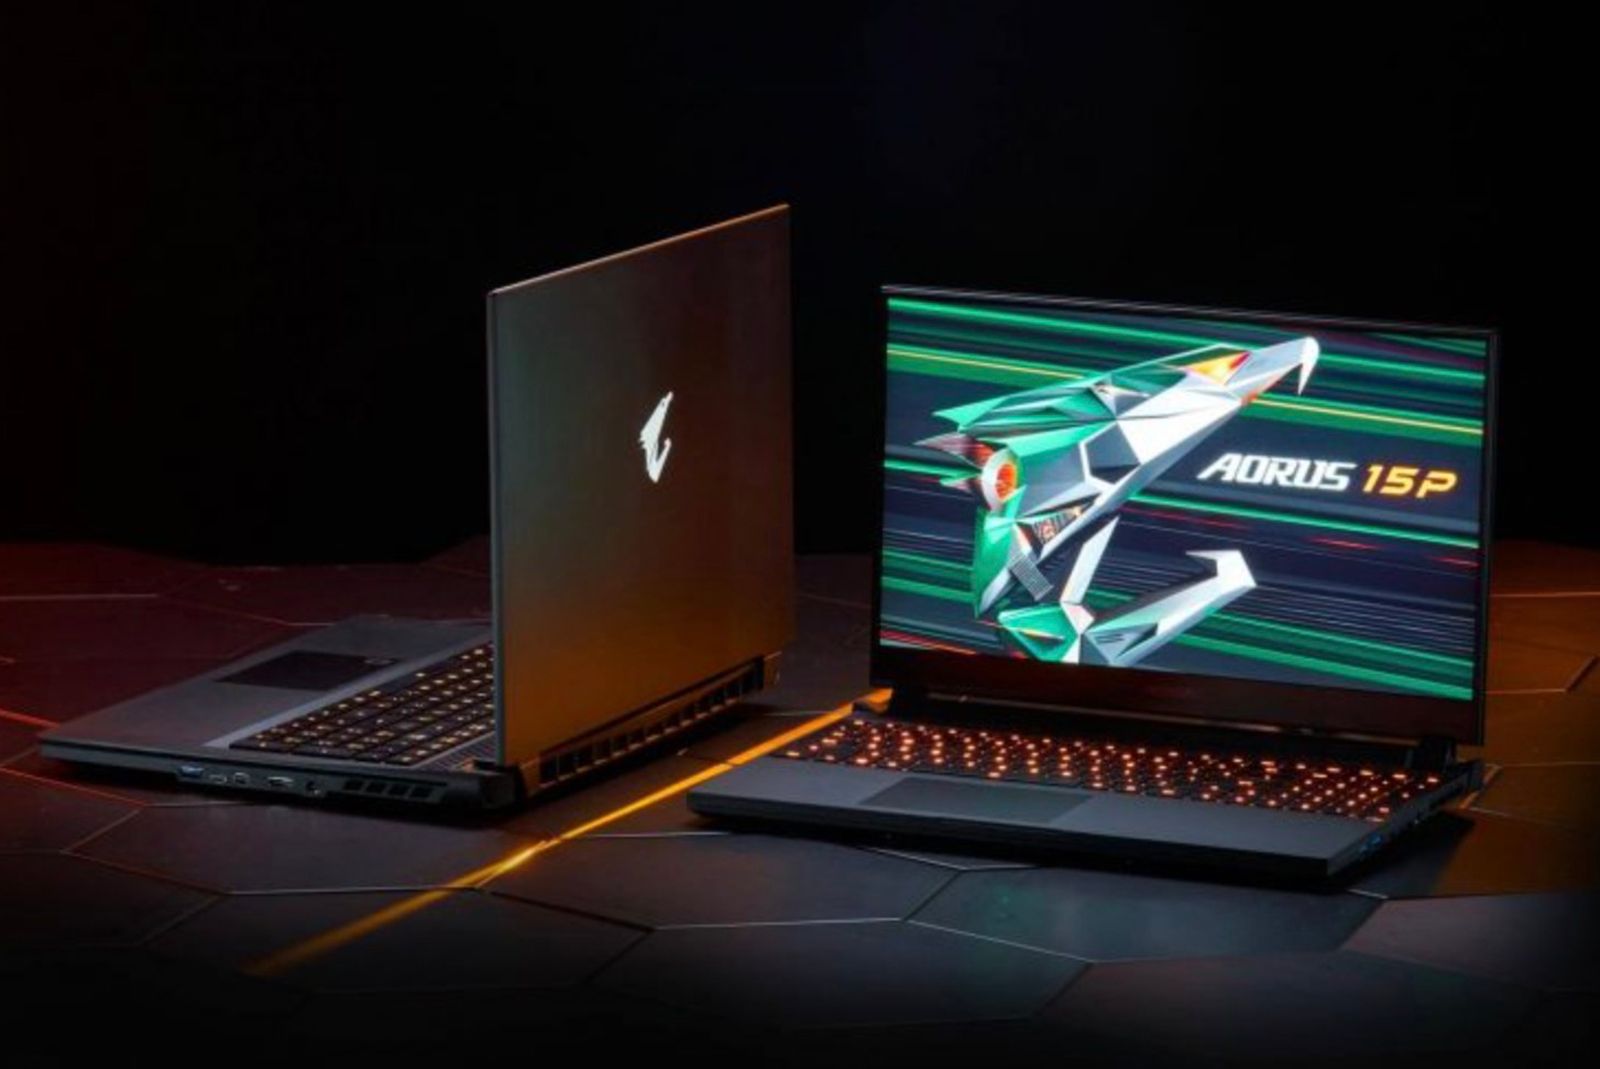 Grab this RTX 3070 powered Gigabyte AORUS 15P laptop with $550 off photo 1